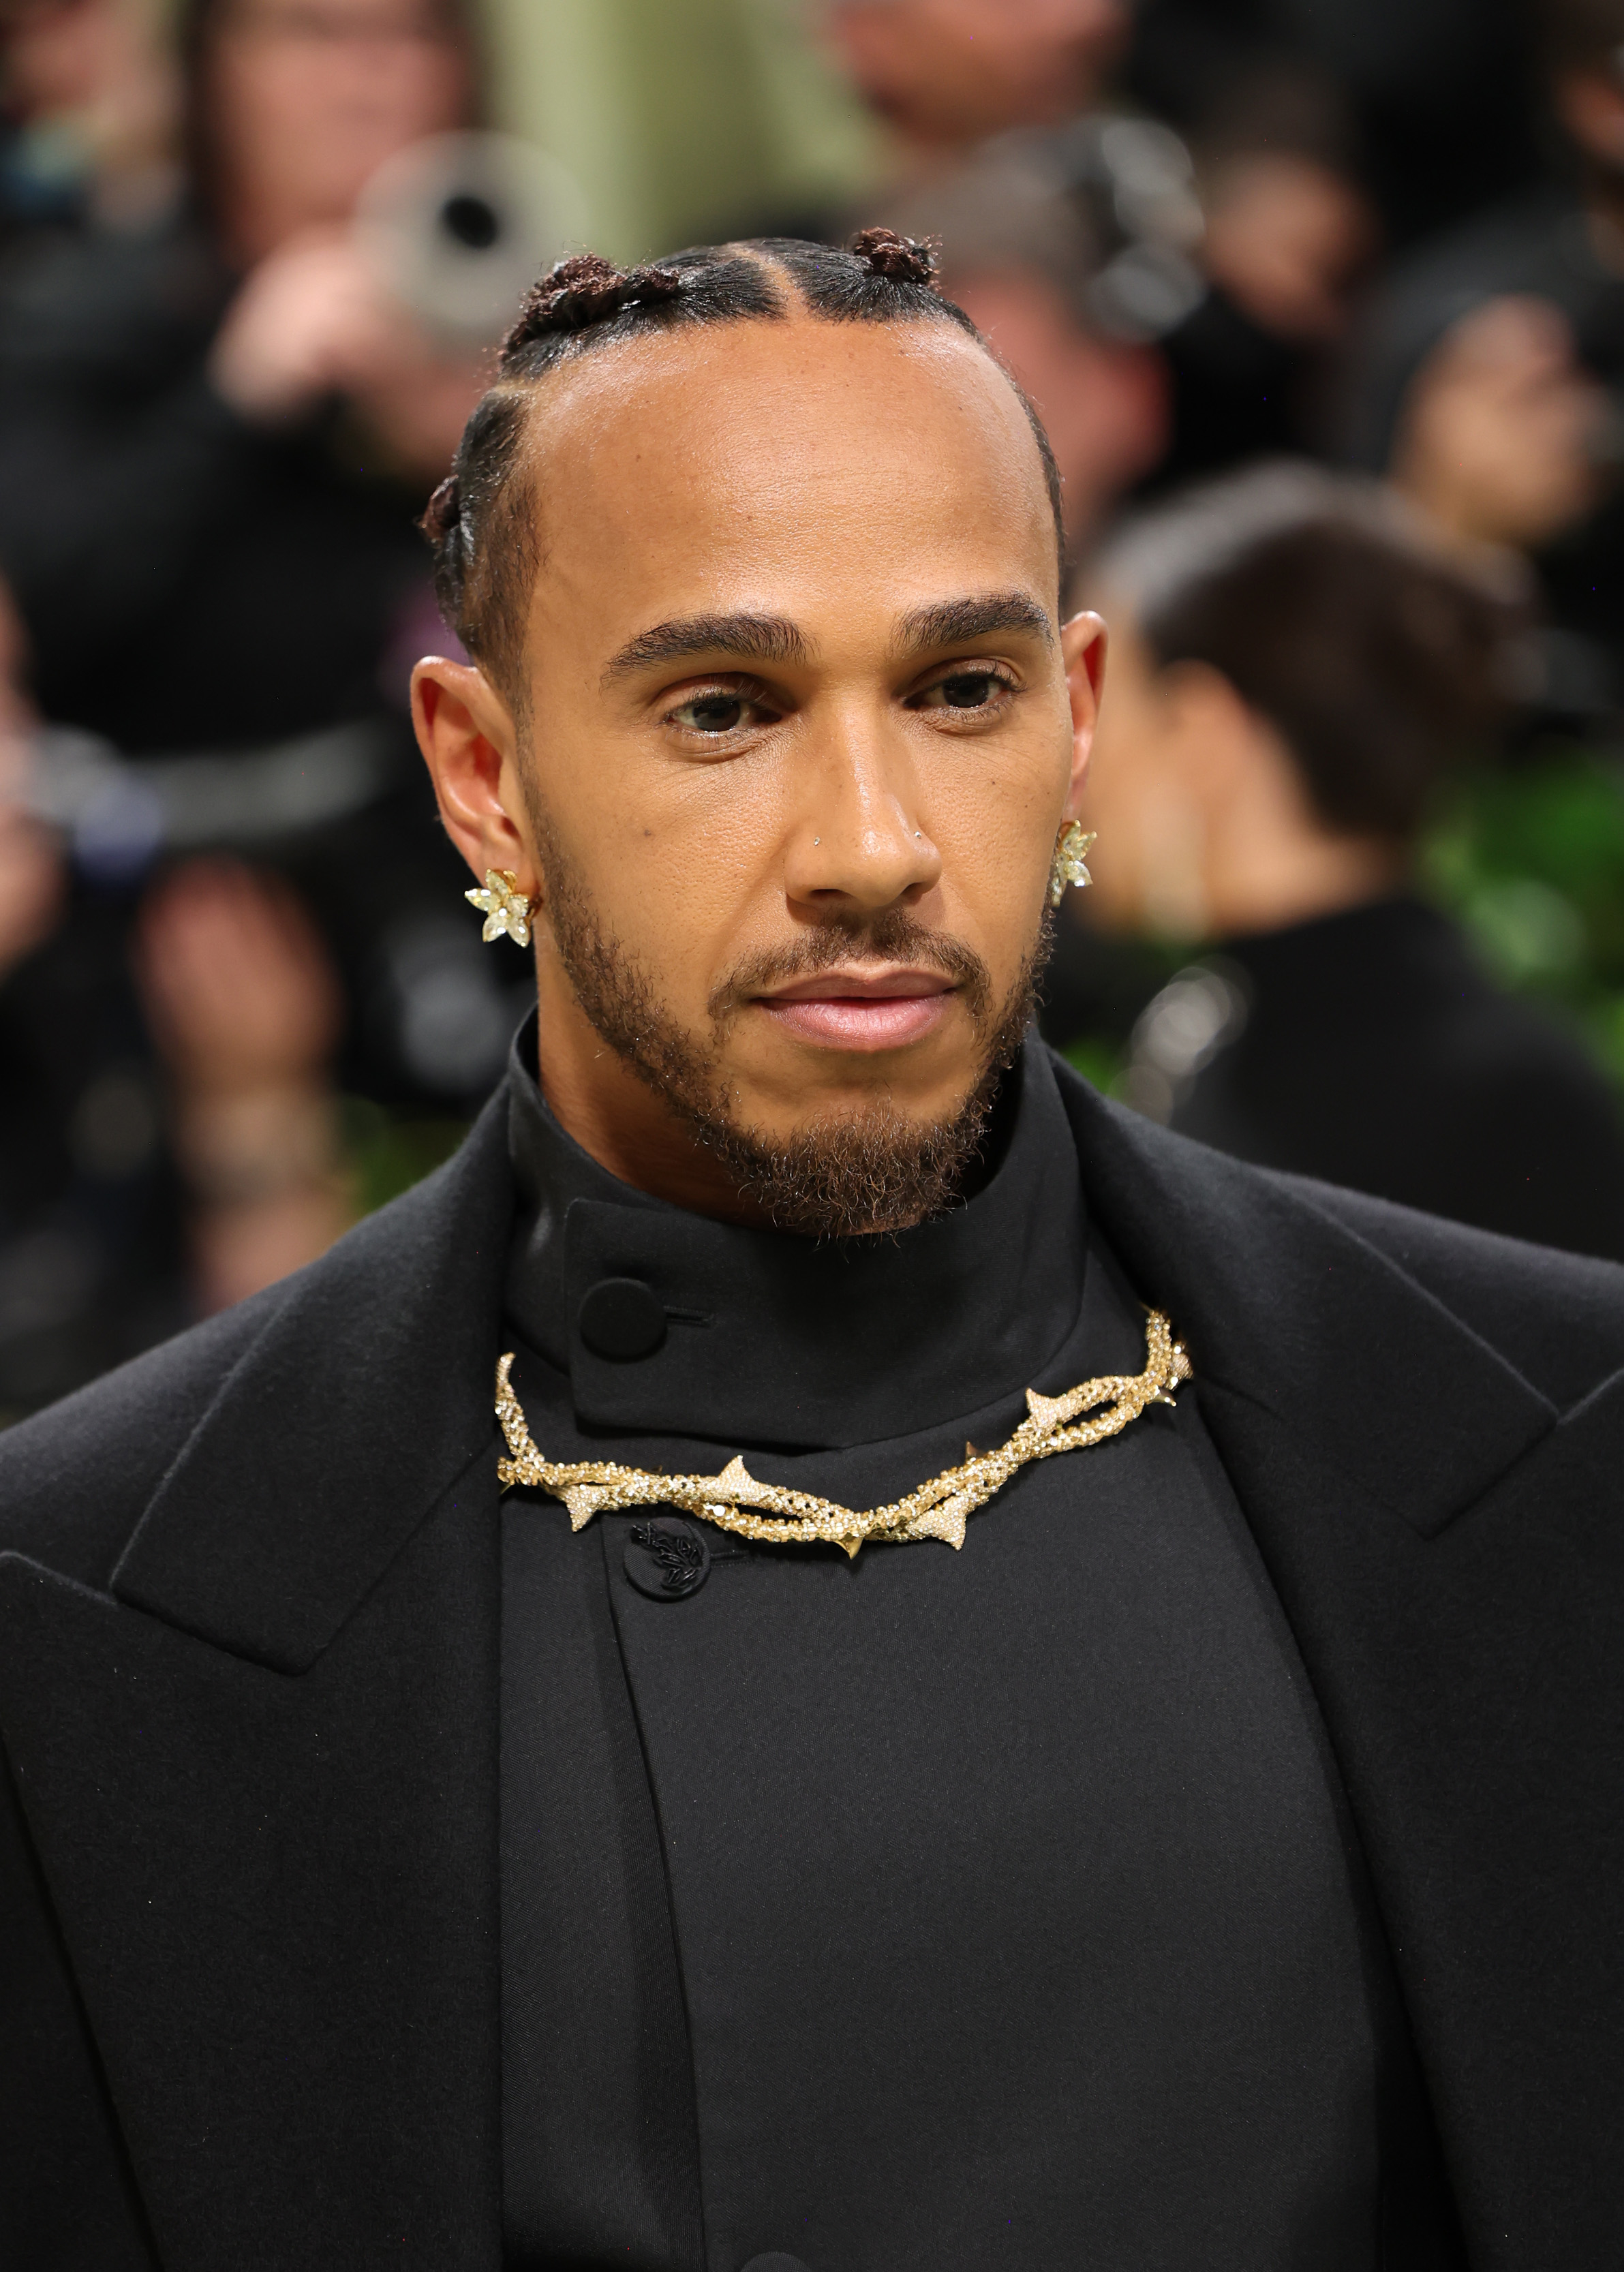 Lewis Hamilton in a black tuxedo with gold chain detail at an event